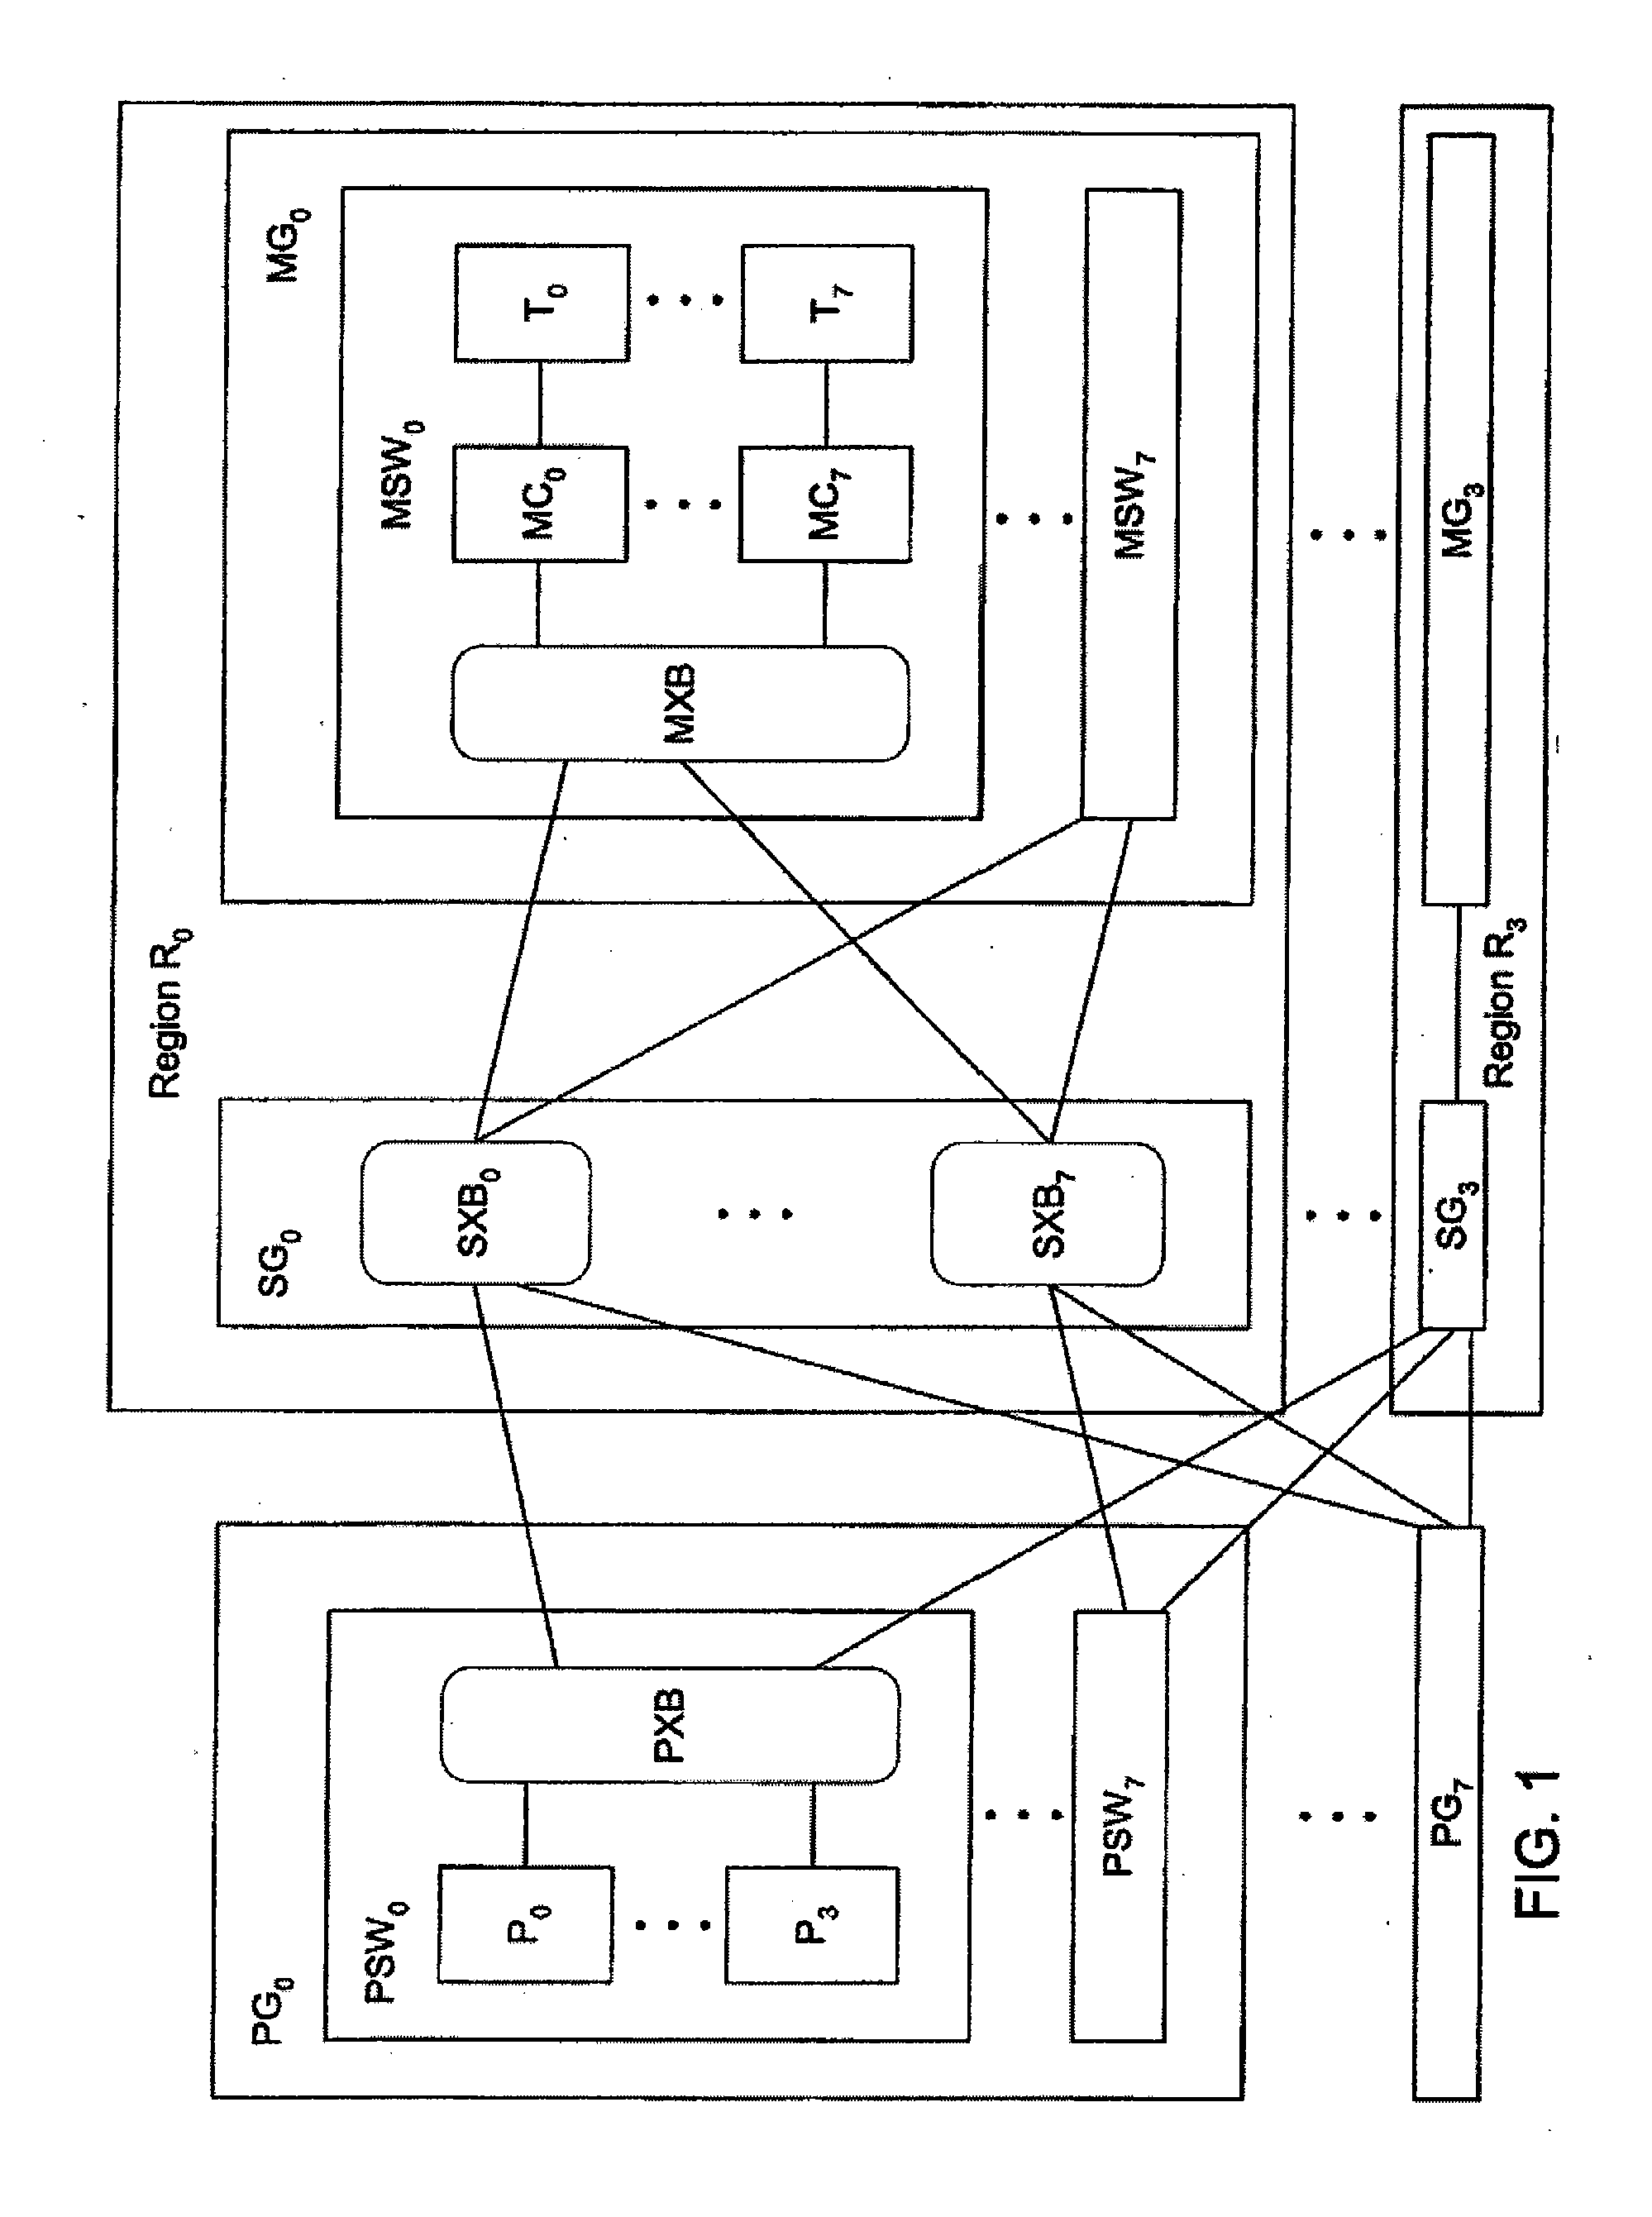 Layered crossbar for interconnection of multiple processors and shared memories